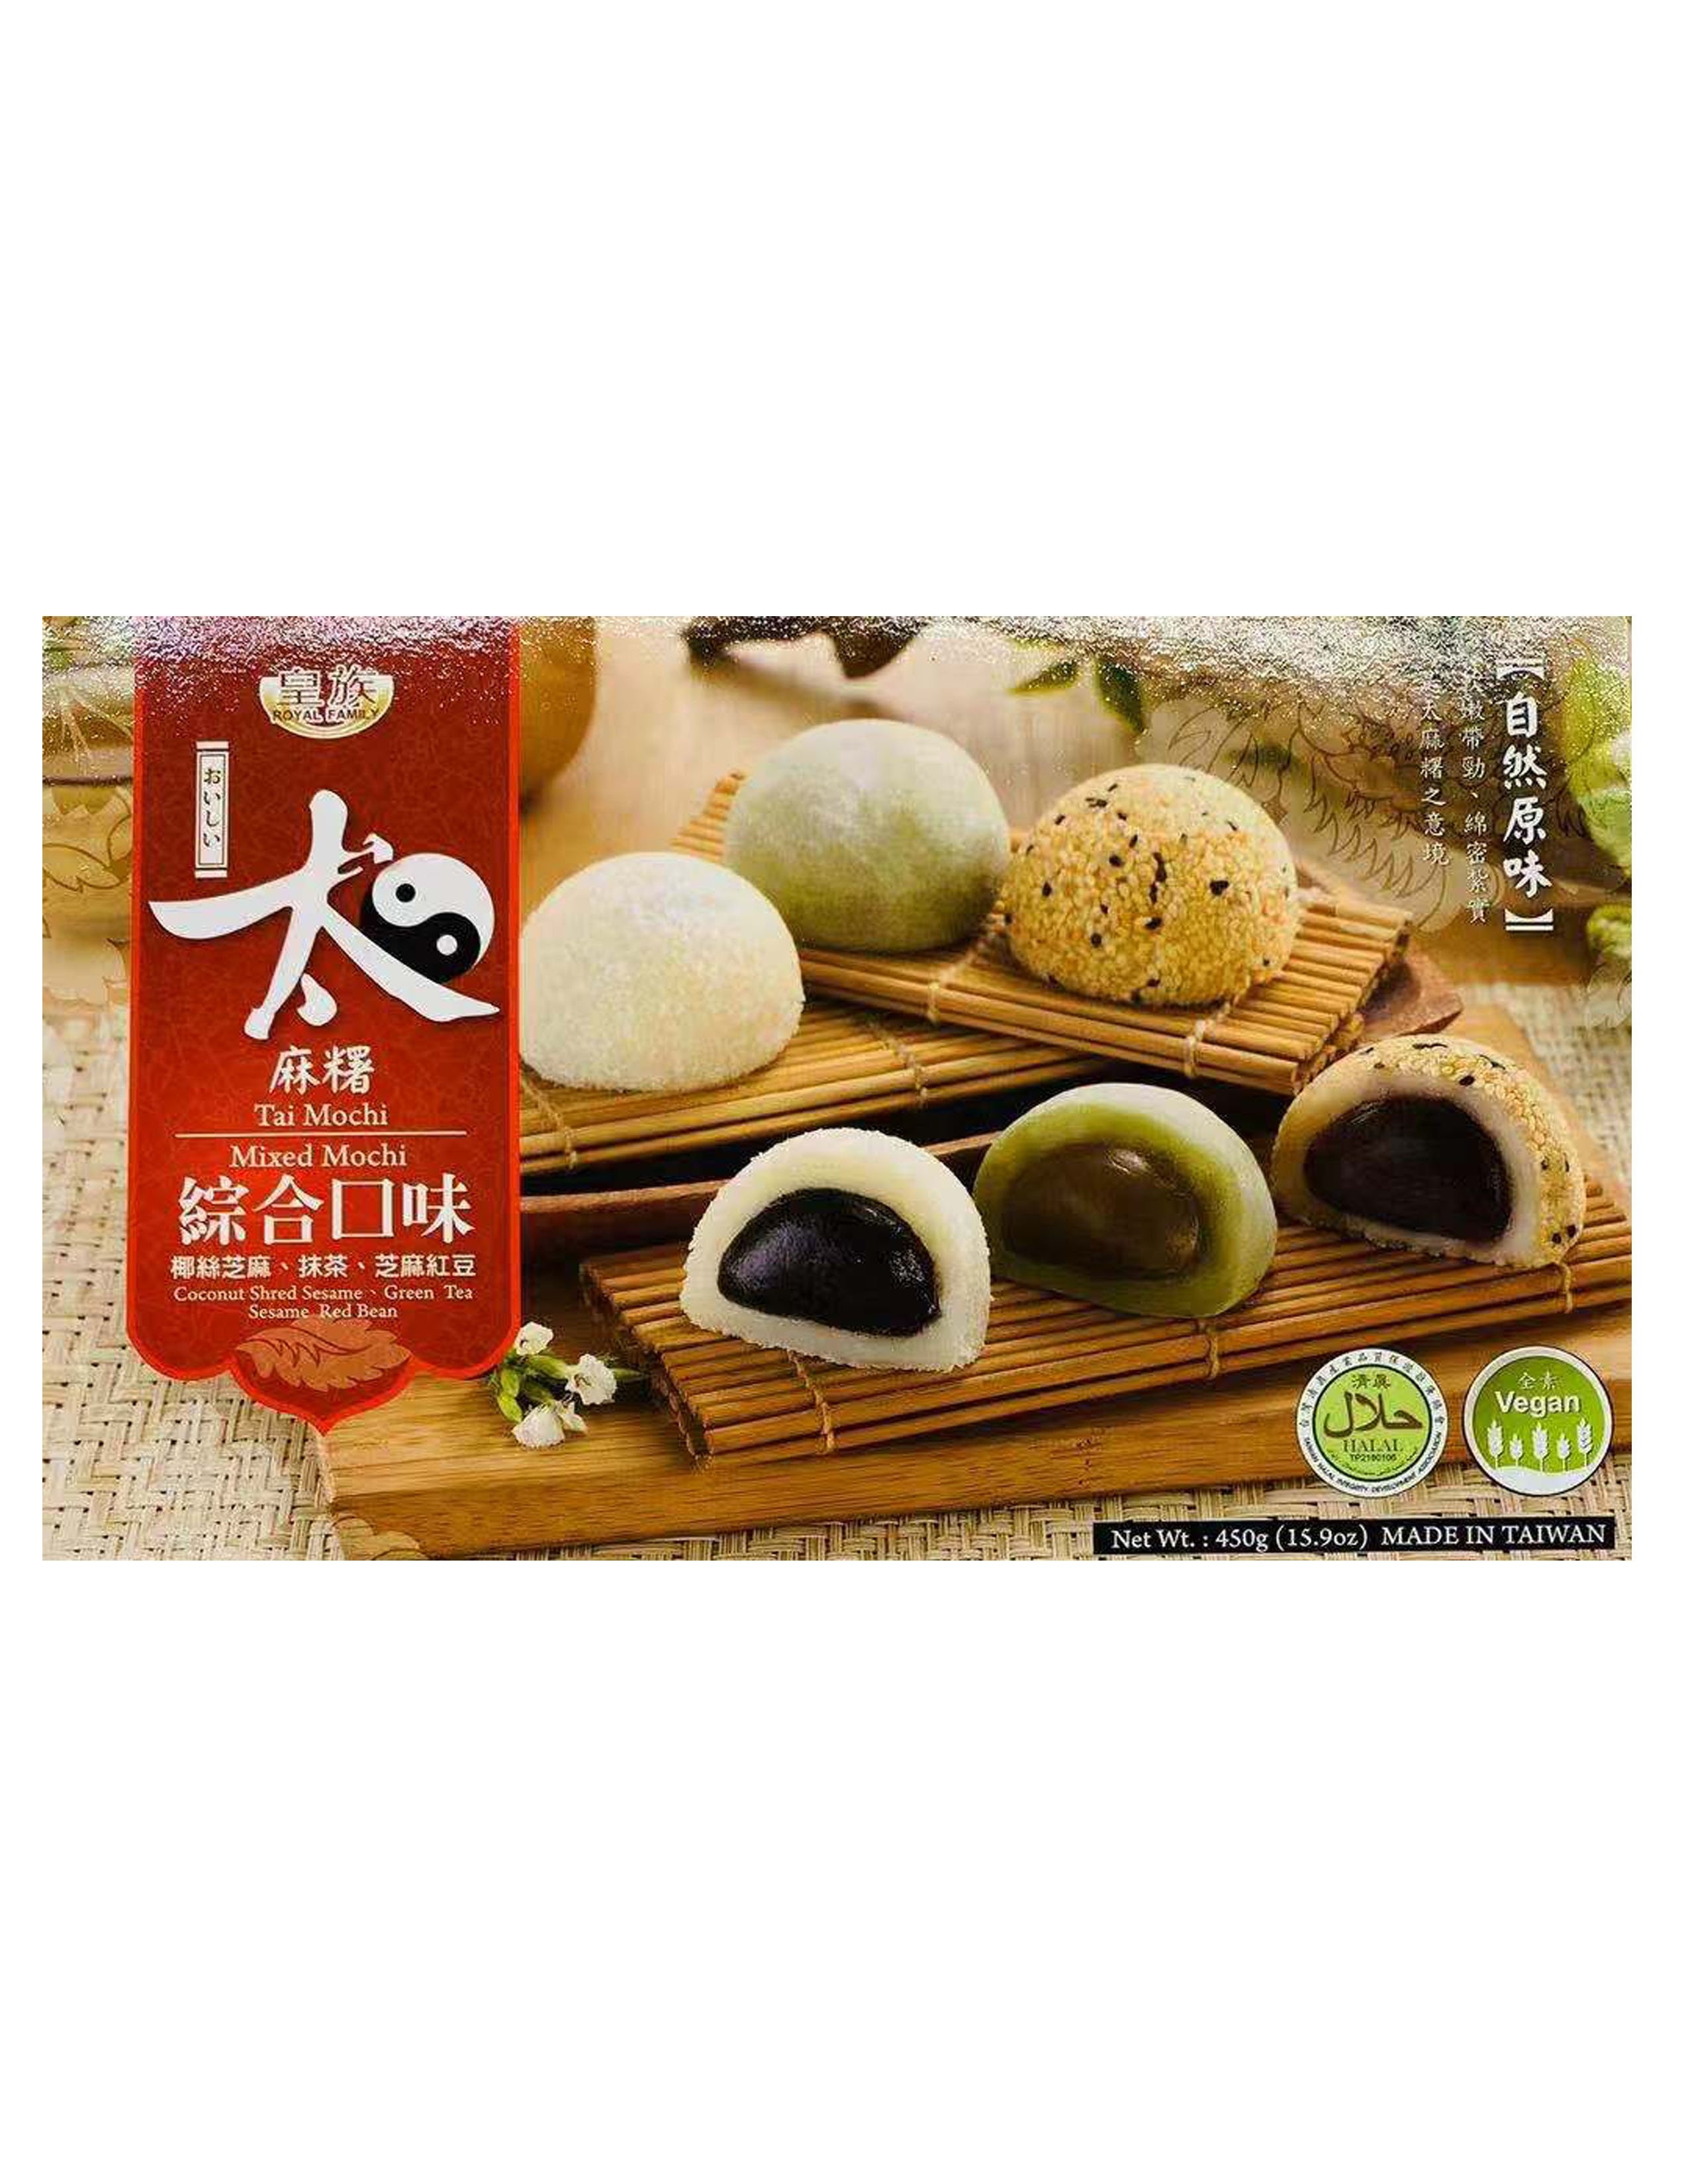 Japanese Style Mochi Rice Cake Assorted Coconut Shred Sesame, Green Tea Sesame & Red Bean Flavours 450g